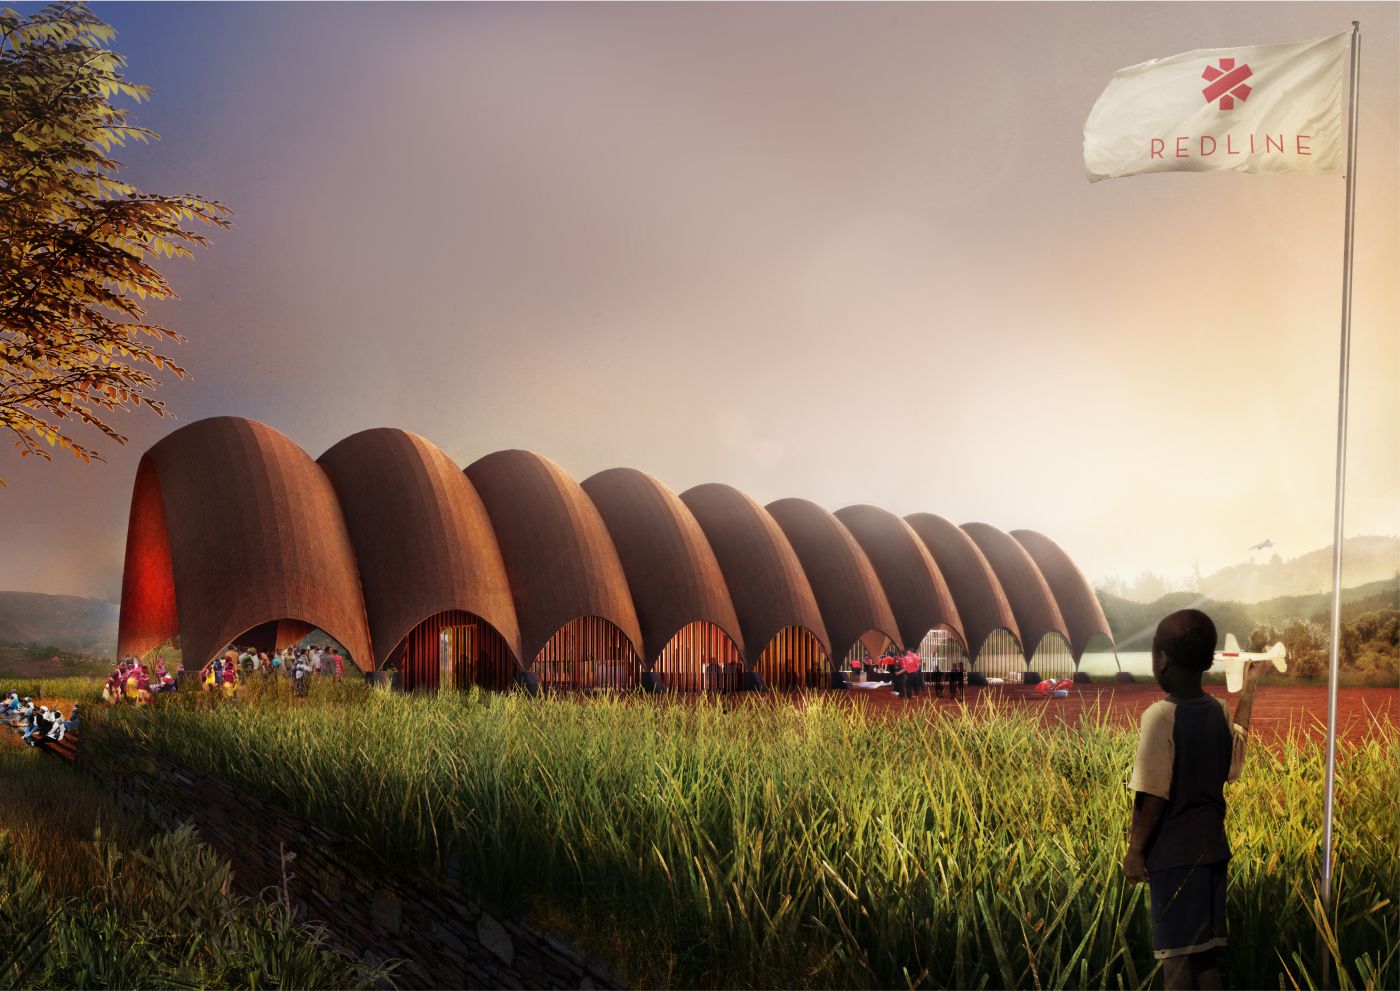 The drone port’s aesthetics will be designed to be in harmony with local terrain. The vaulted structure will be made from bricks pressed from local raw materials. After some basic construction training, local people will be able to assemble the structures themselves, and the design allows multiple vaults to be linked depending on need. 
